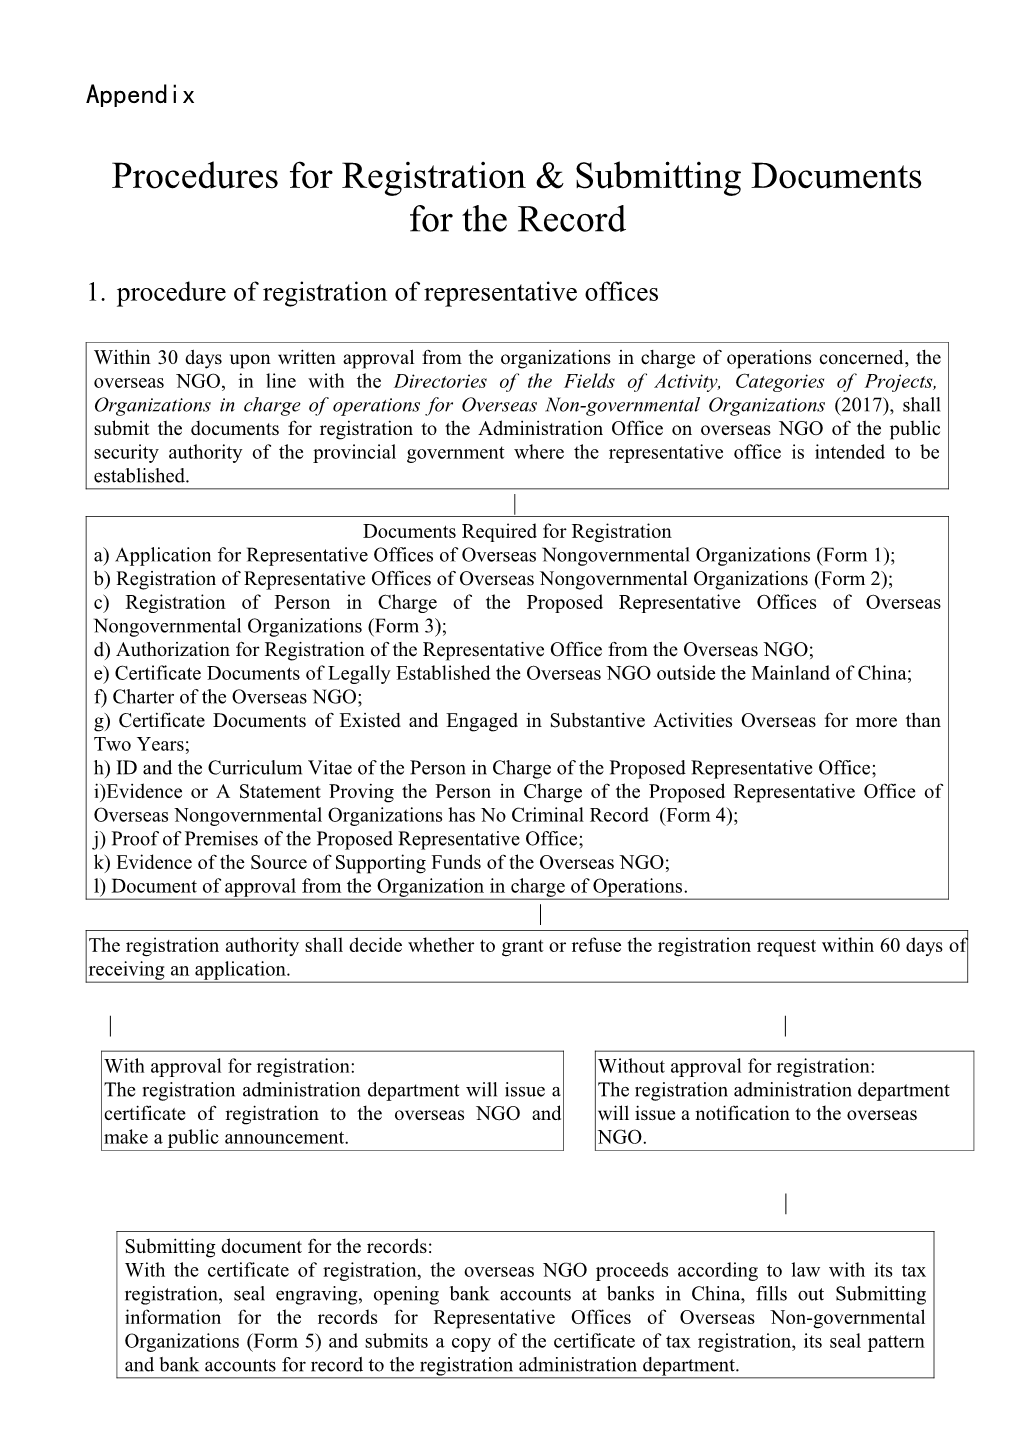 Procedures for Registration Submitting Documents for the Record